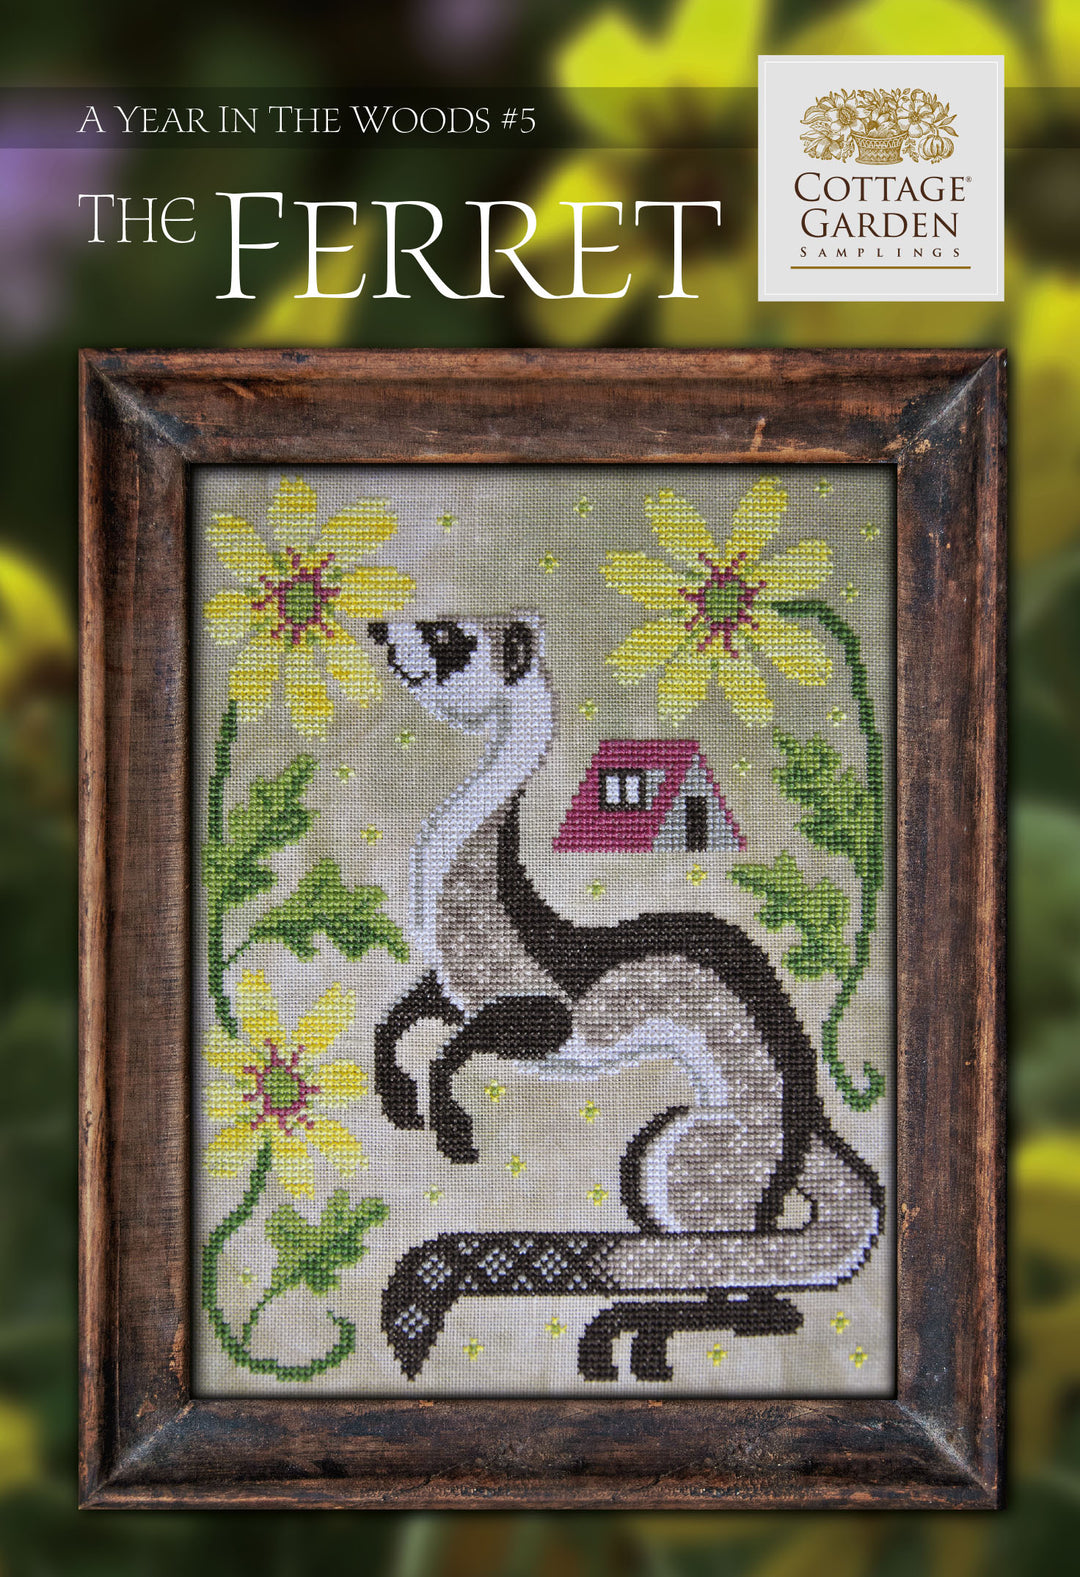 The Ferret, A Year in the Woods #5 | Cottage Garden Samplings